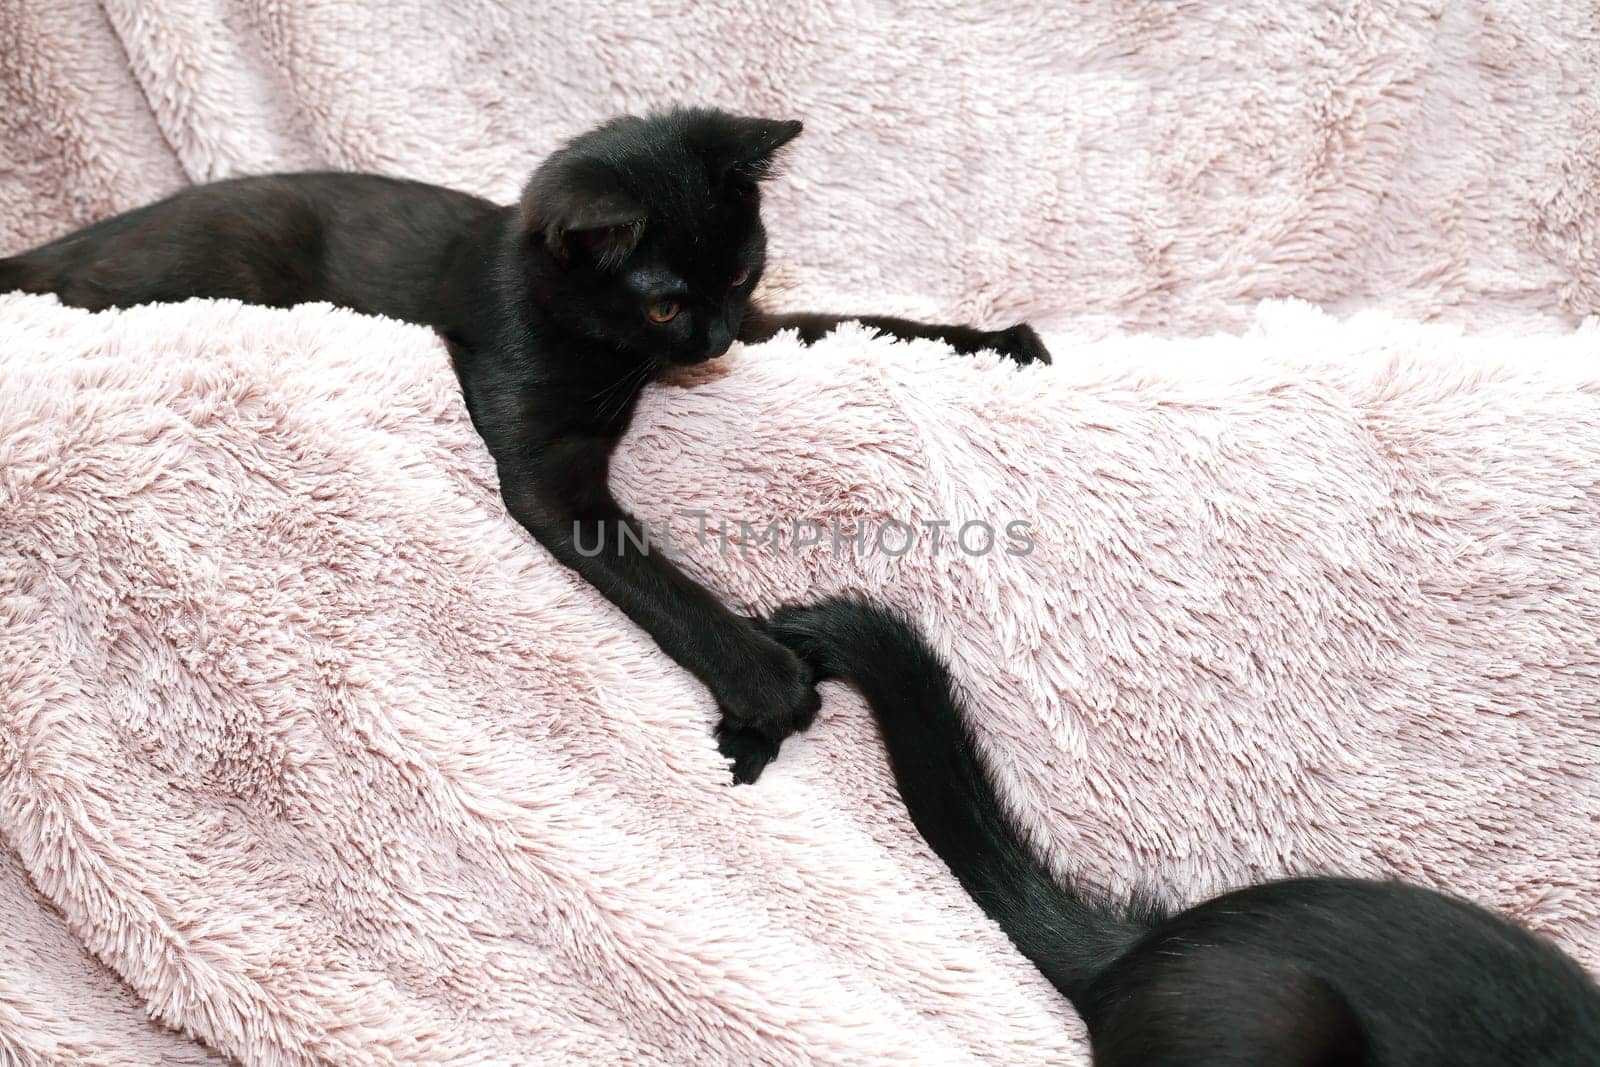 A pair of small black kittens playing on a fabric background